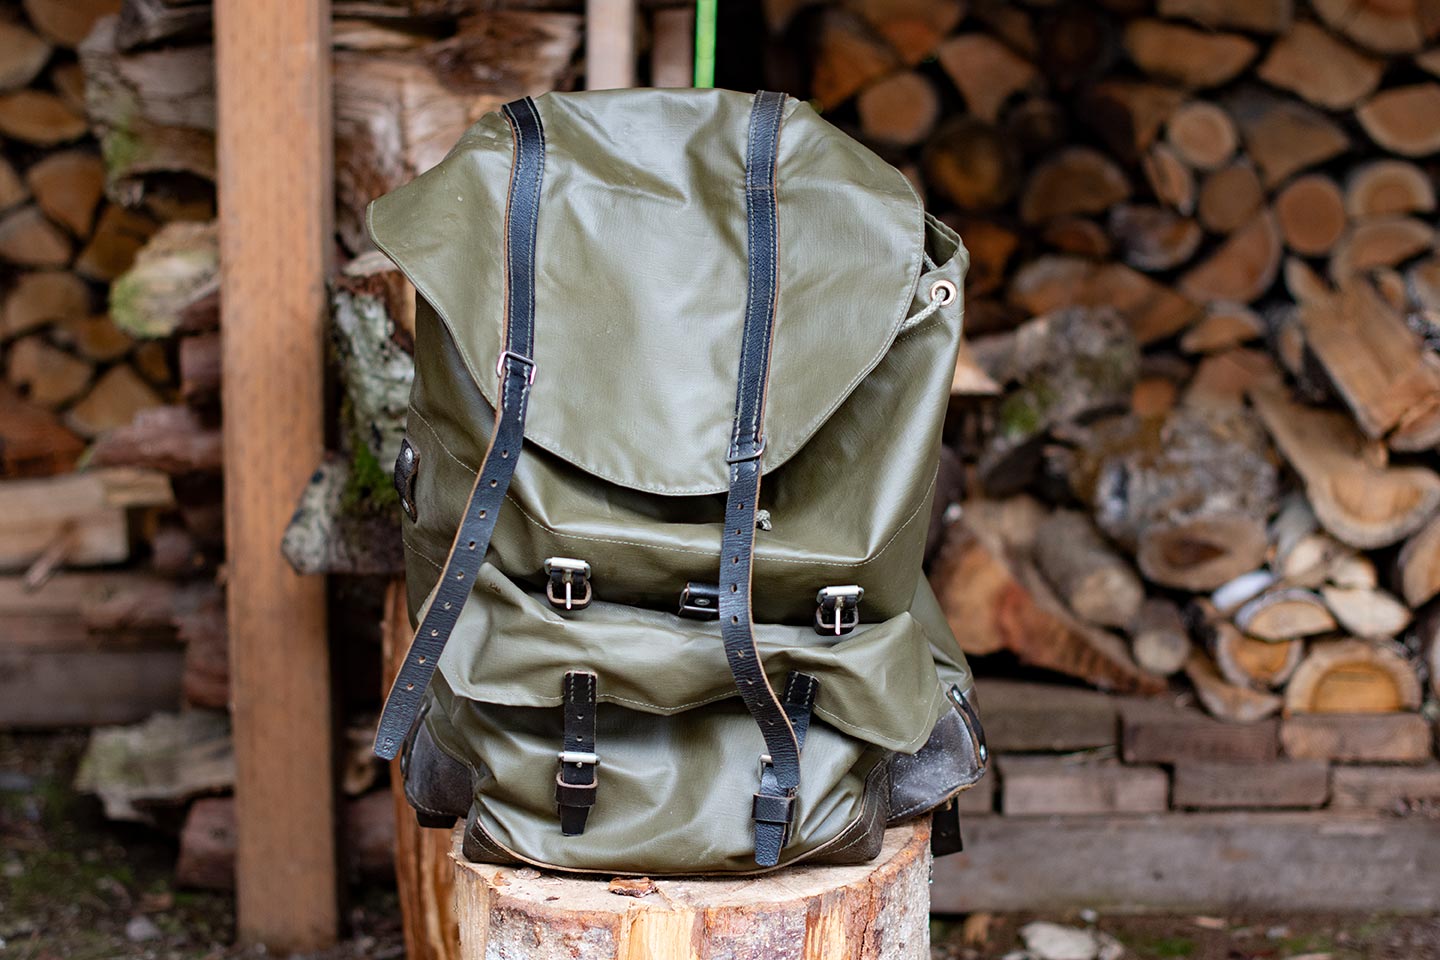 Rubberized Swiss rucksack with black leather fittings sitting on a stump in front of wood stack